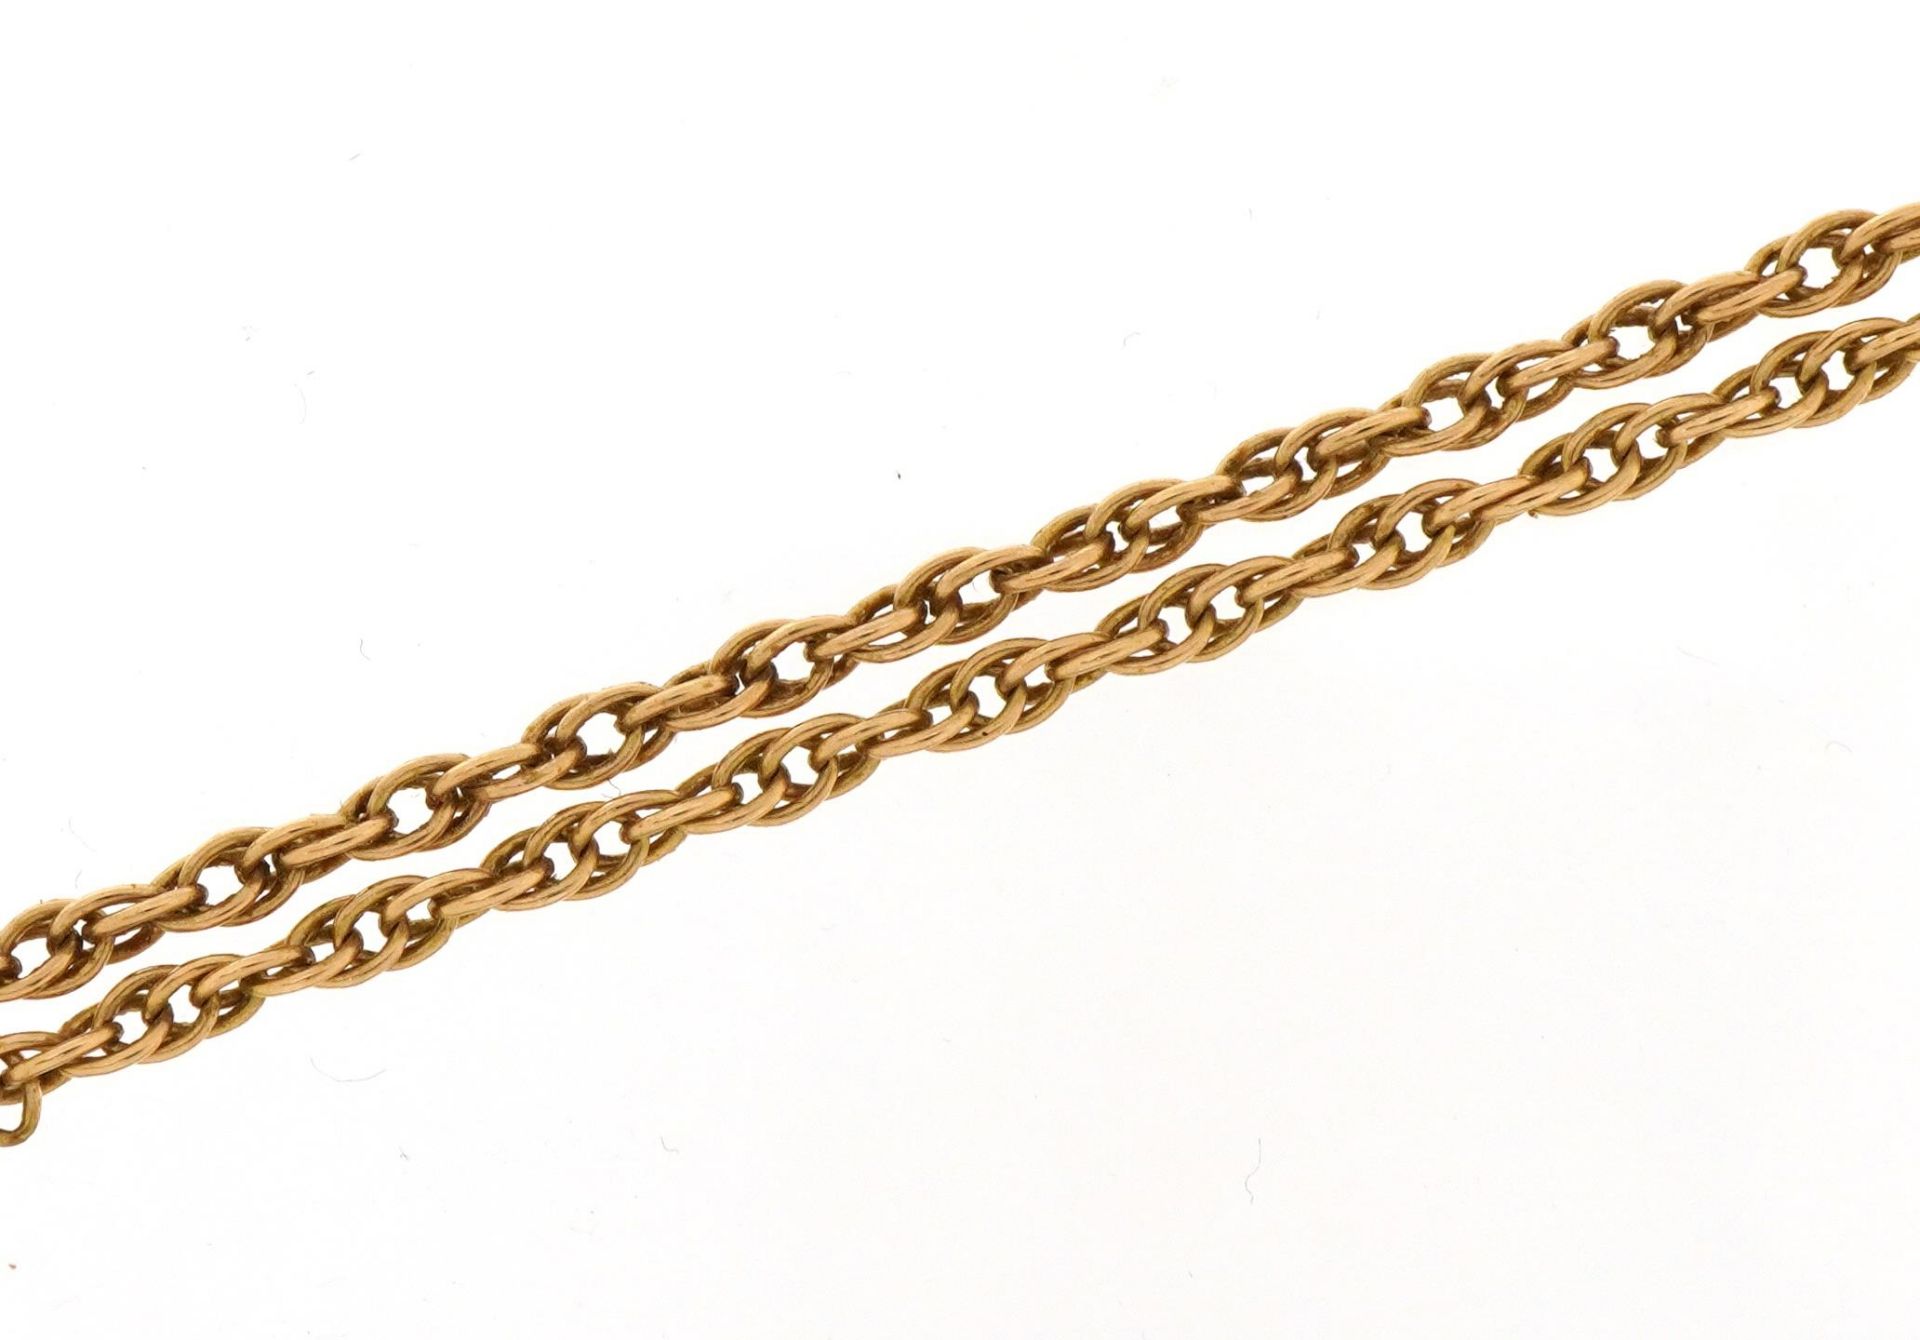 9ct gold necklace, 41cm in length, 4.5g